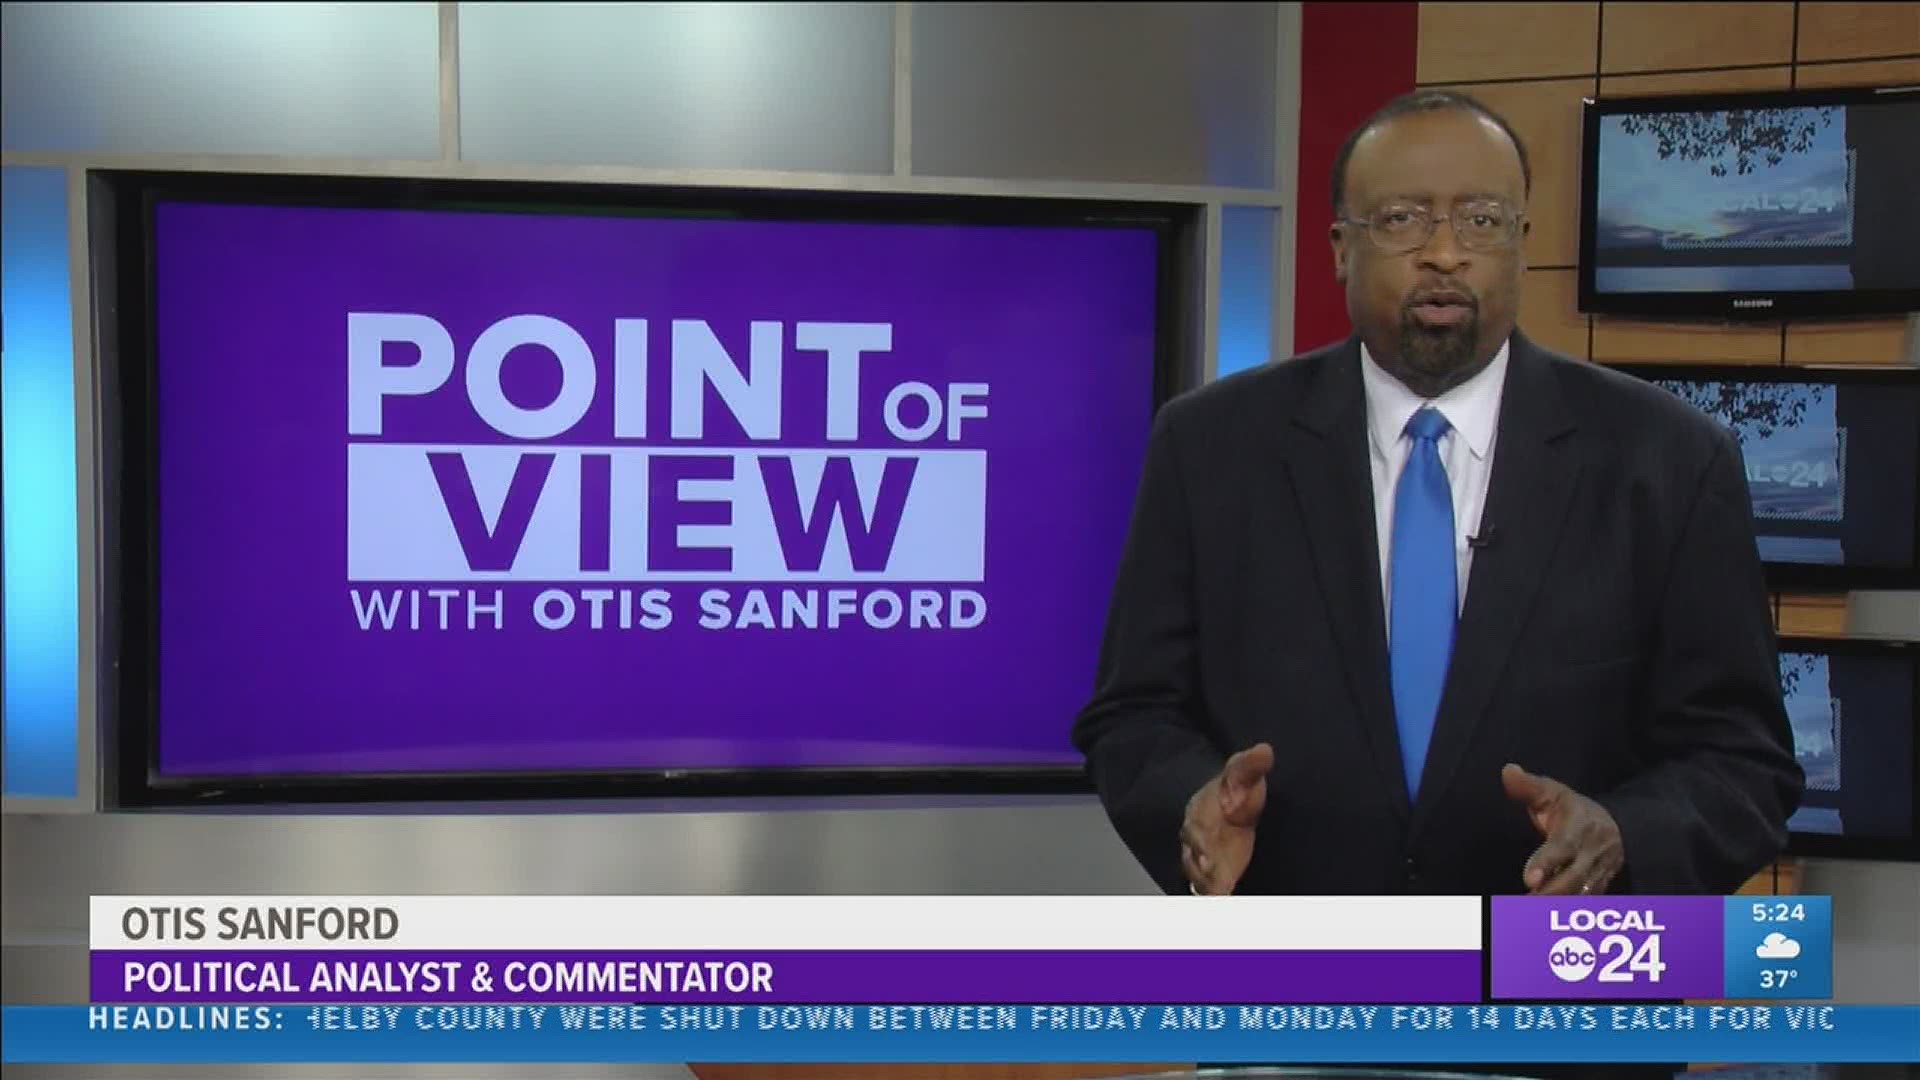 Local 24 News political analyst and commentator Otis Sanford shares his point of view on FedEx’s part in the distribution of the COVID-19 vaccine.